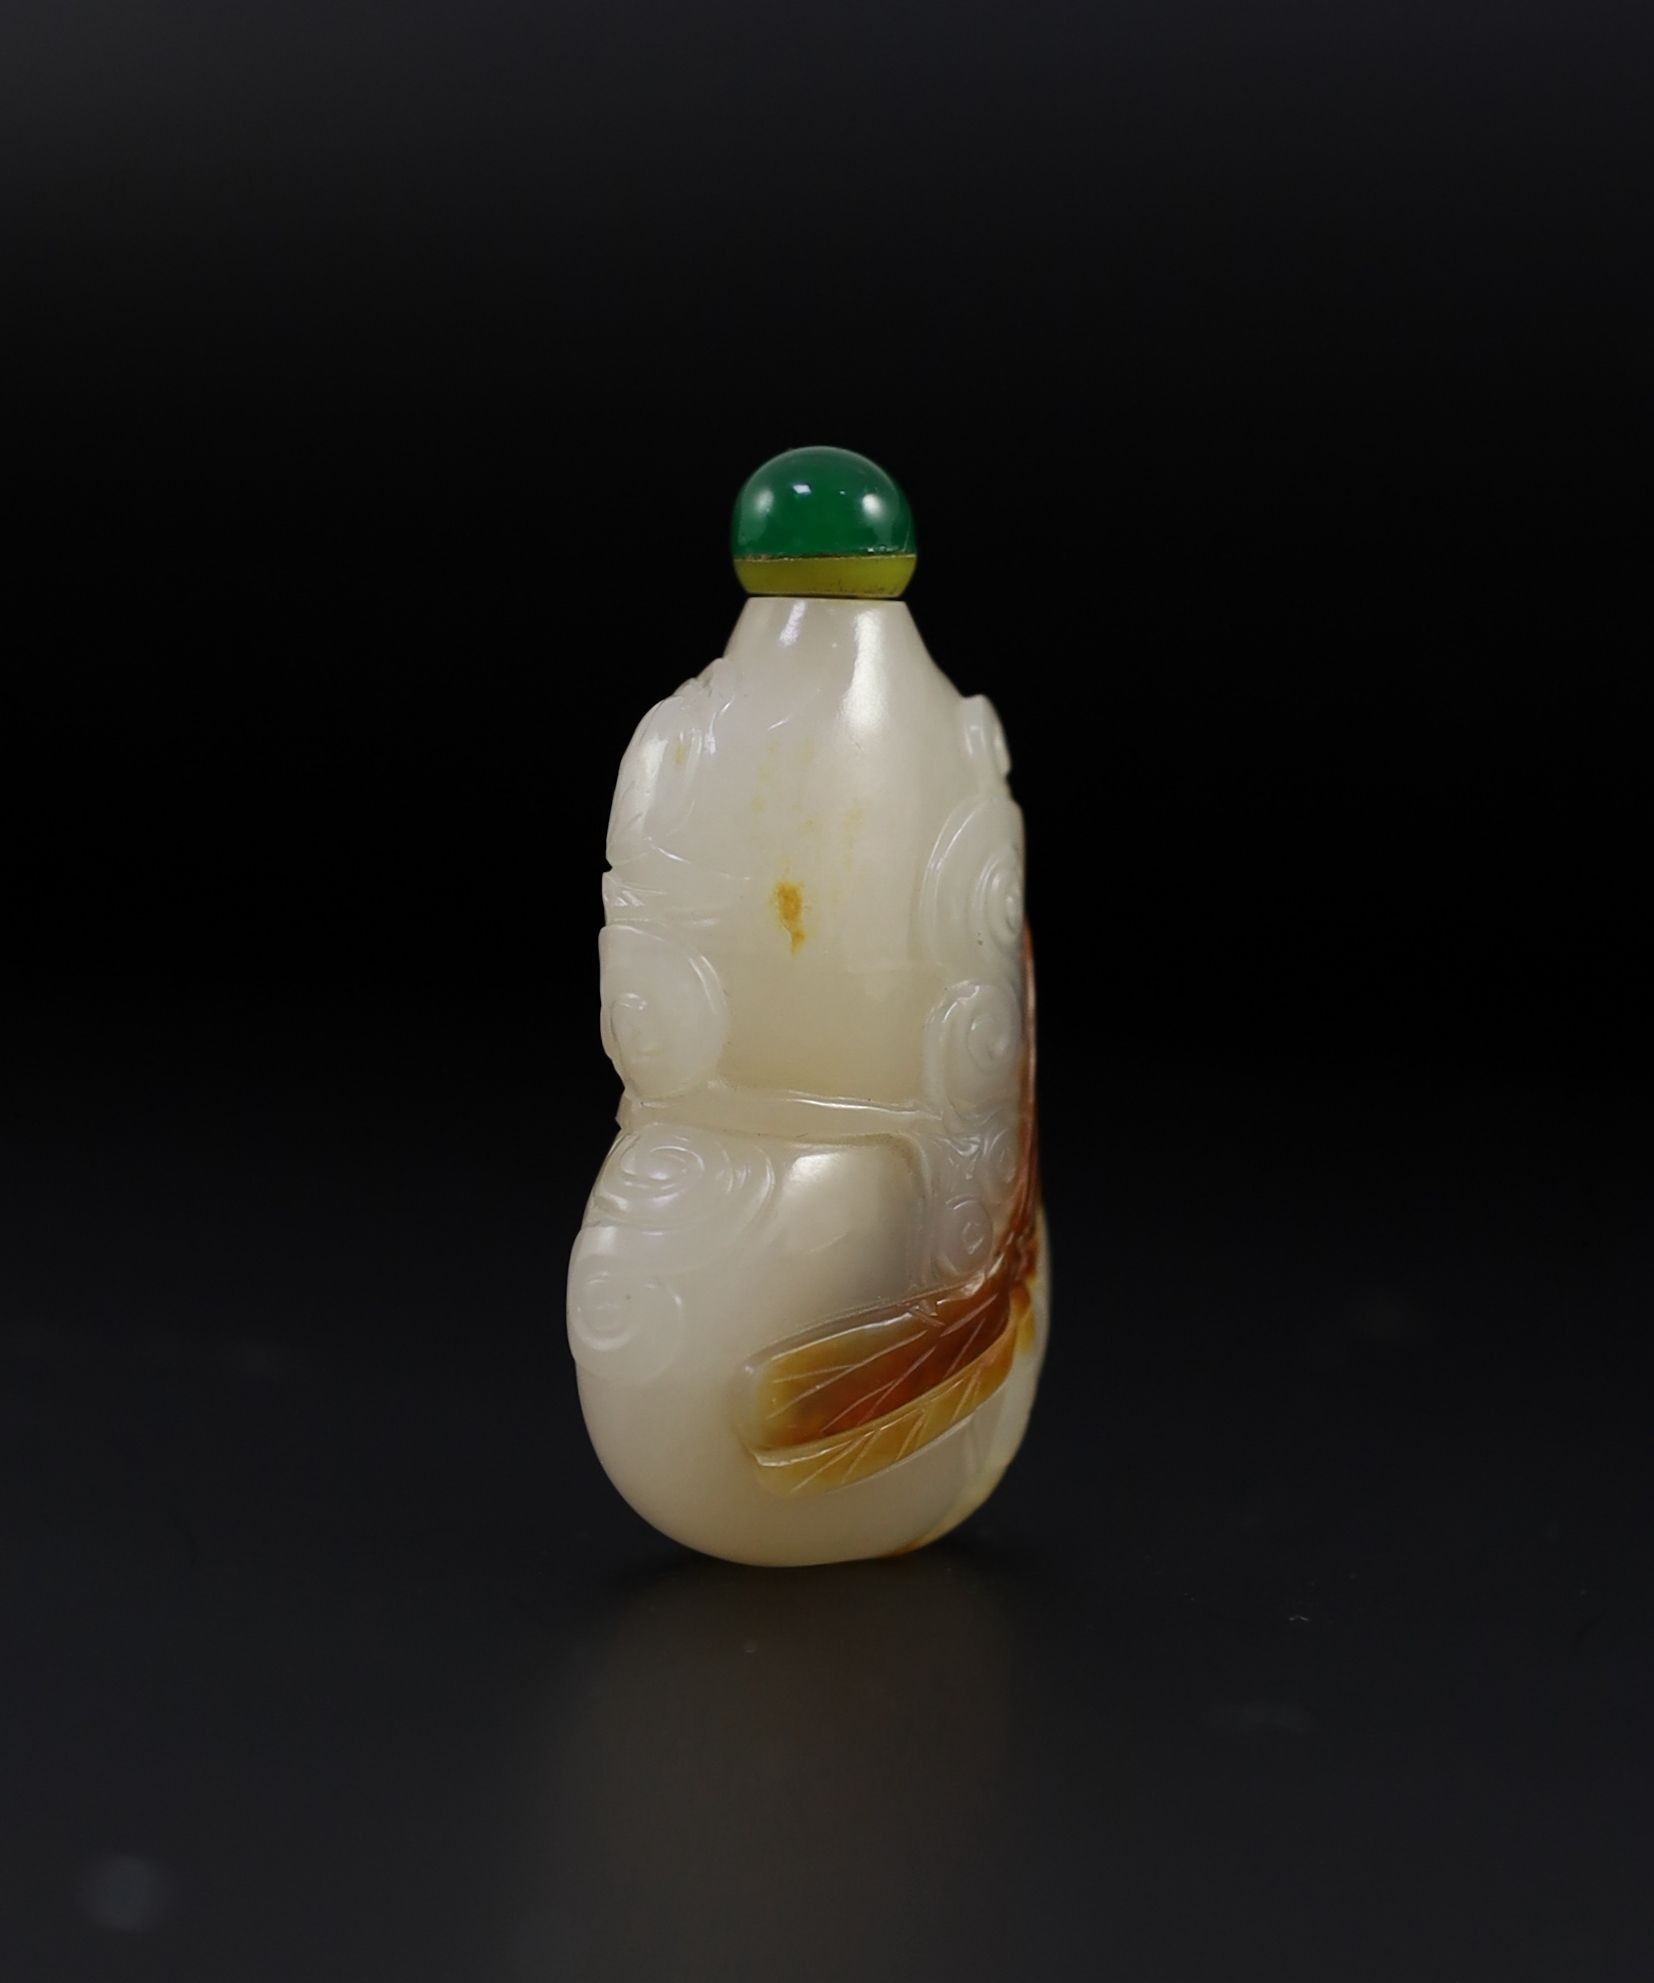 A Chinese white and russet jade snuff bottle, 19th century, 4.9 cm high excluding stopper